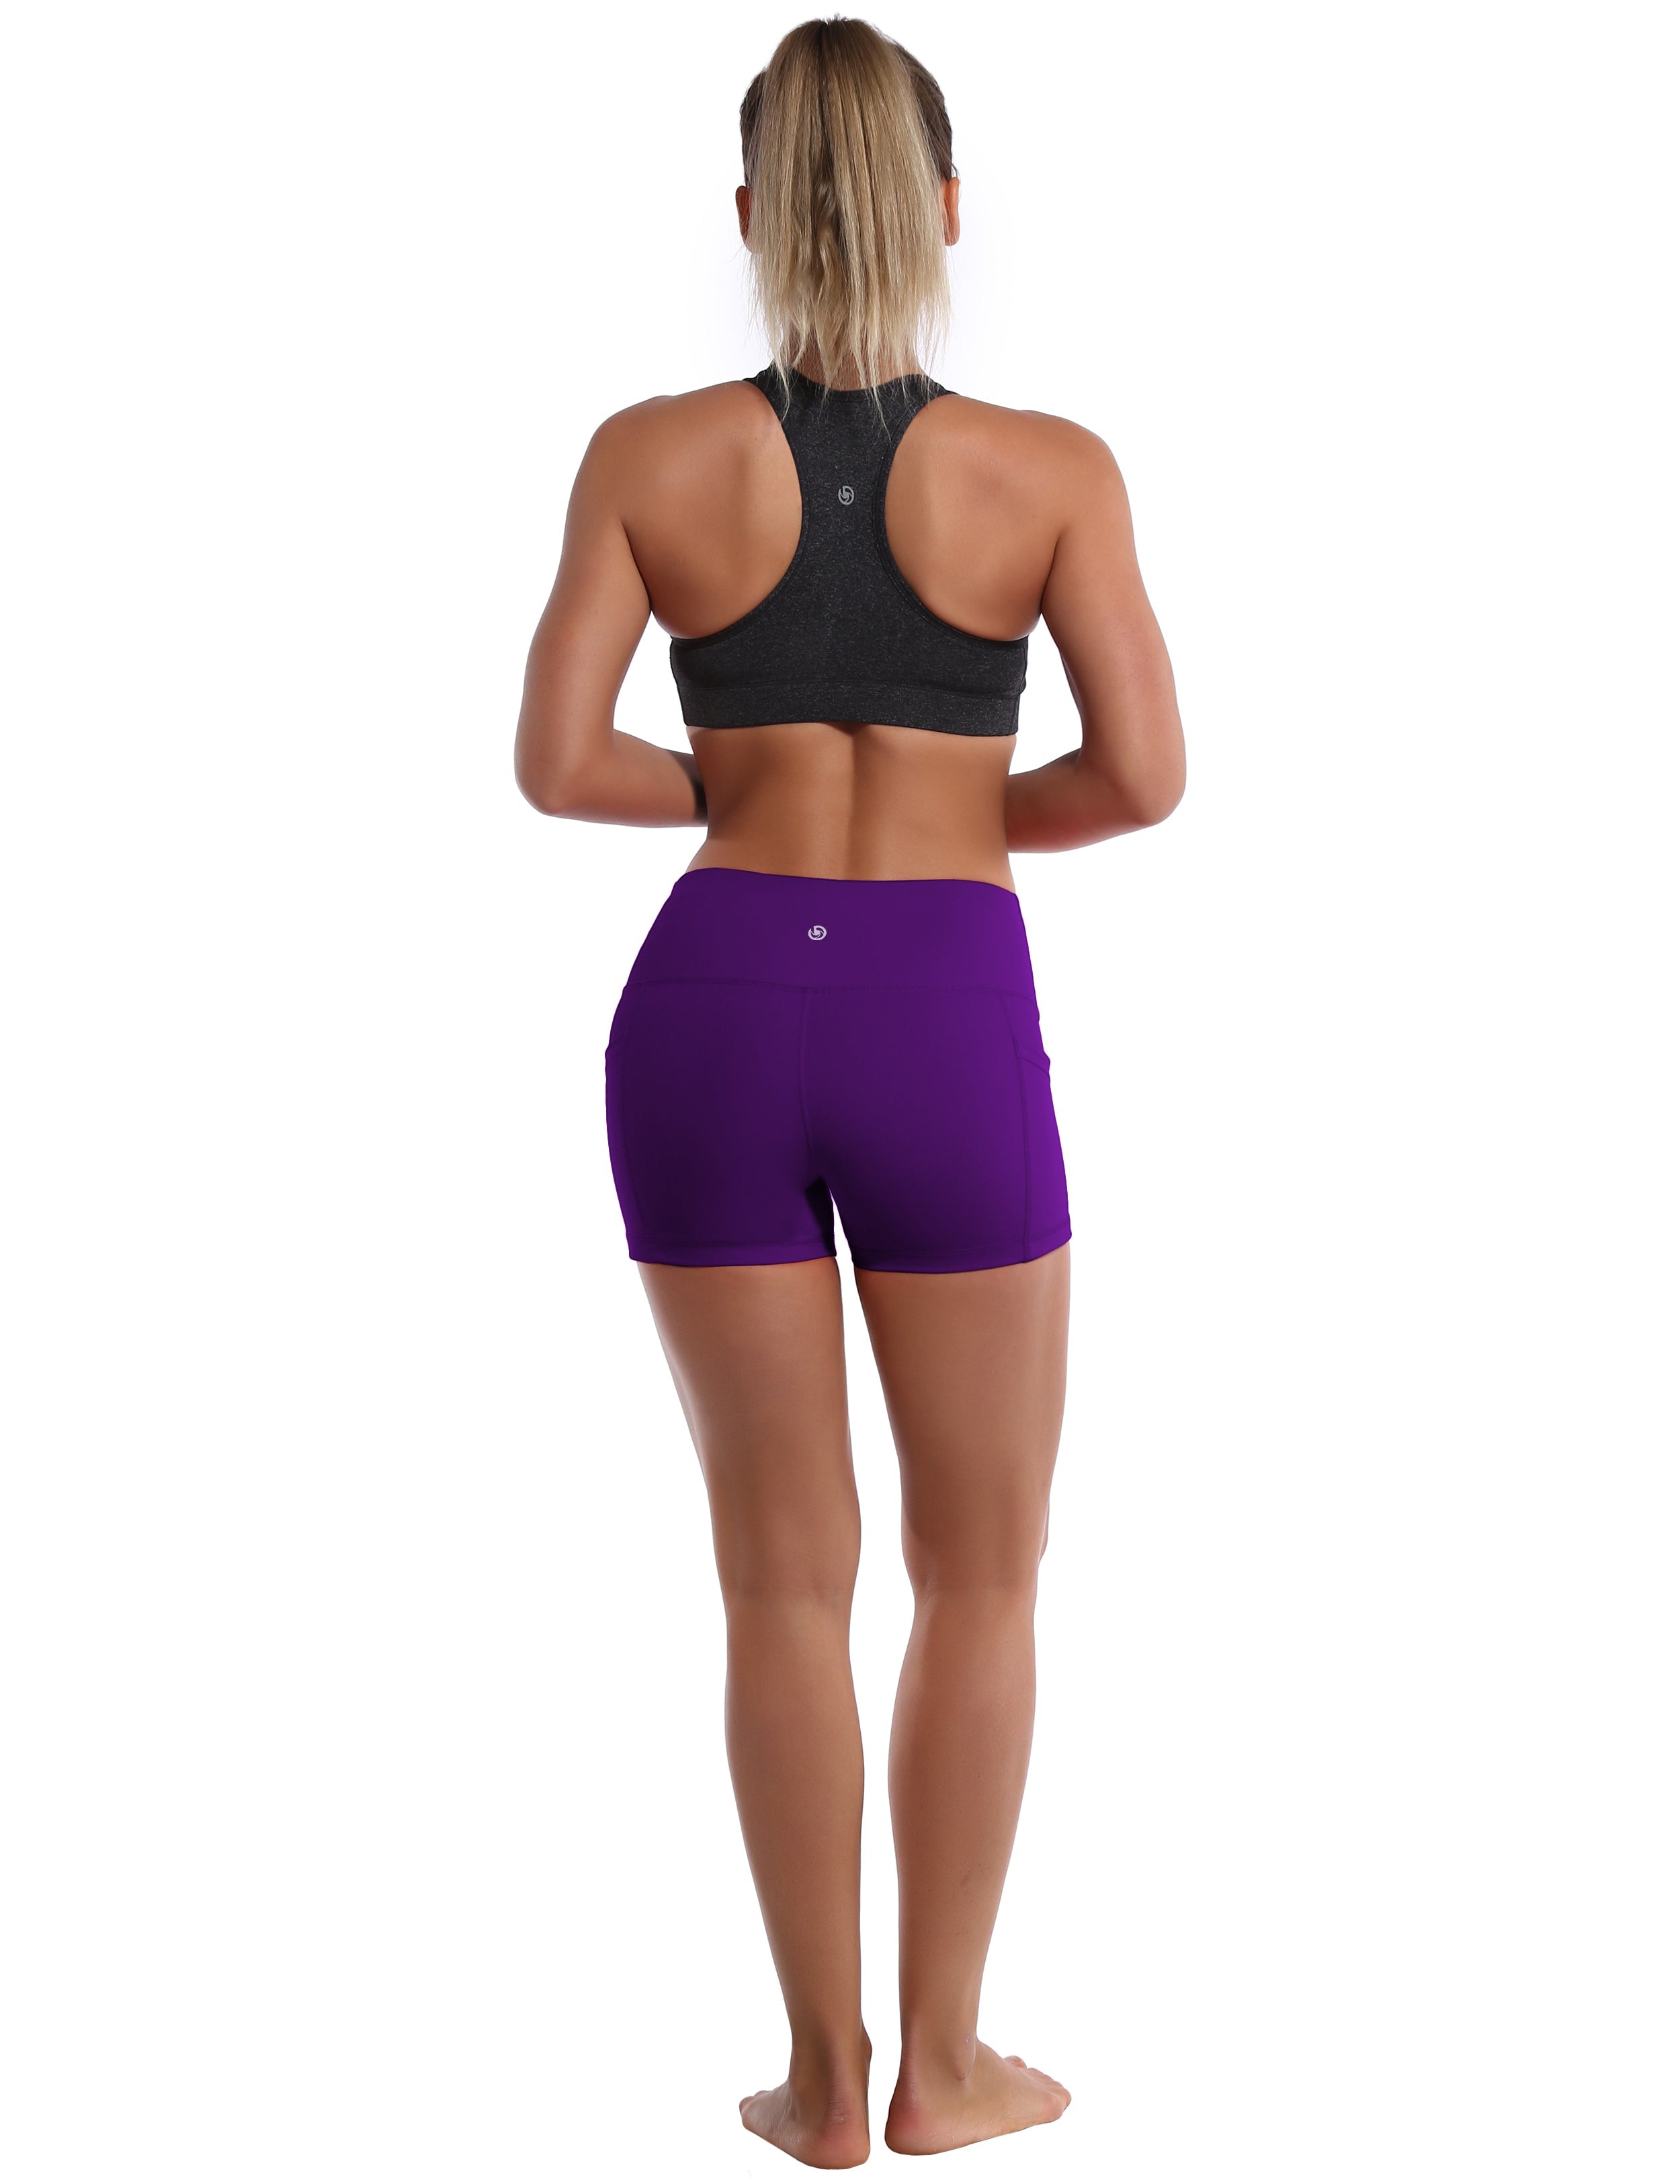 2.5" Side Pockets Jogging Shorts eggplantpurple Sleek, soft, smooth and totally comfortable: our newest sexy style is here. Softest-ever fabric High elasticity High density 4-way stretch Fabric doesn't attract lint easily No see-through Moisture-wicking Machine wash 78% Polyester, 22% Spandex